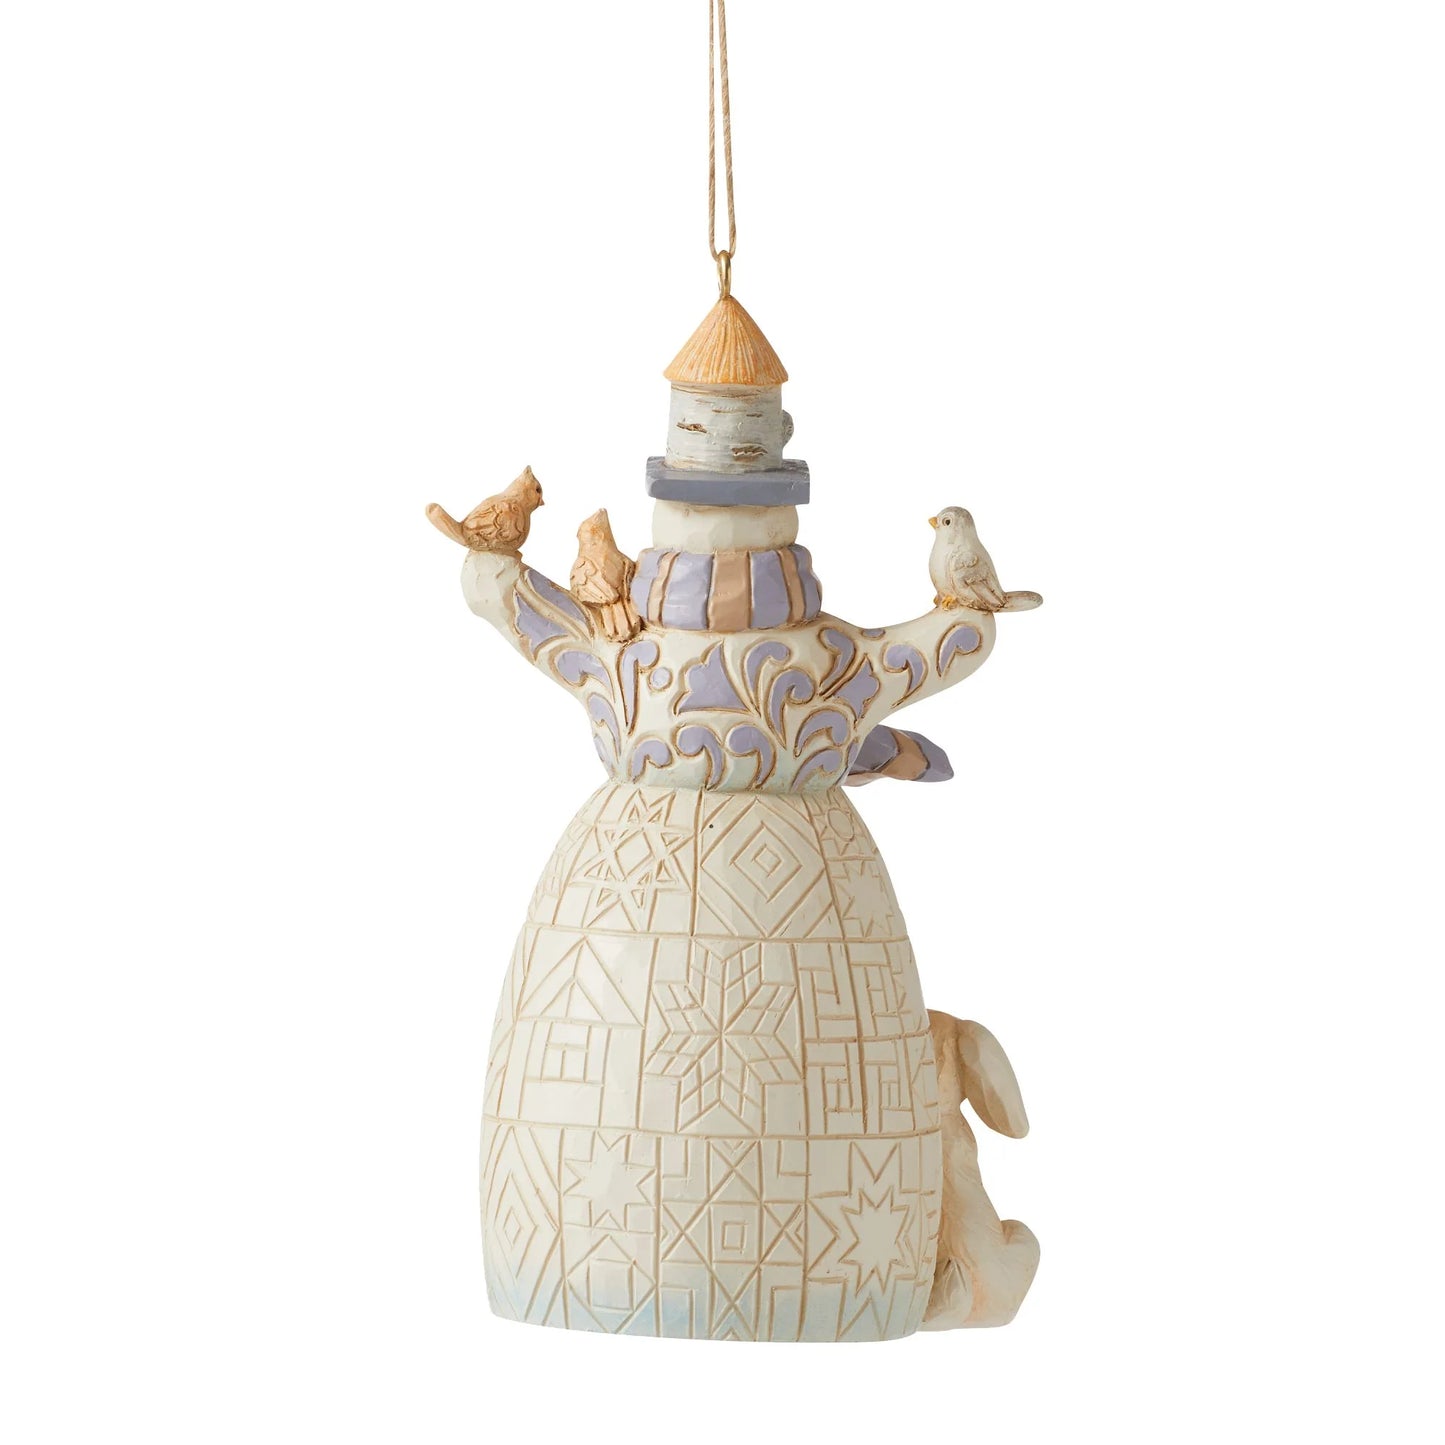 White Woodland Snowman With Birch Birdhouse Hat Hanging Ornament